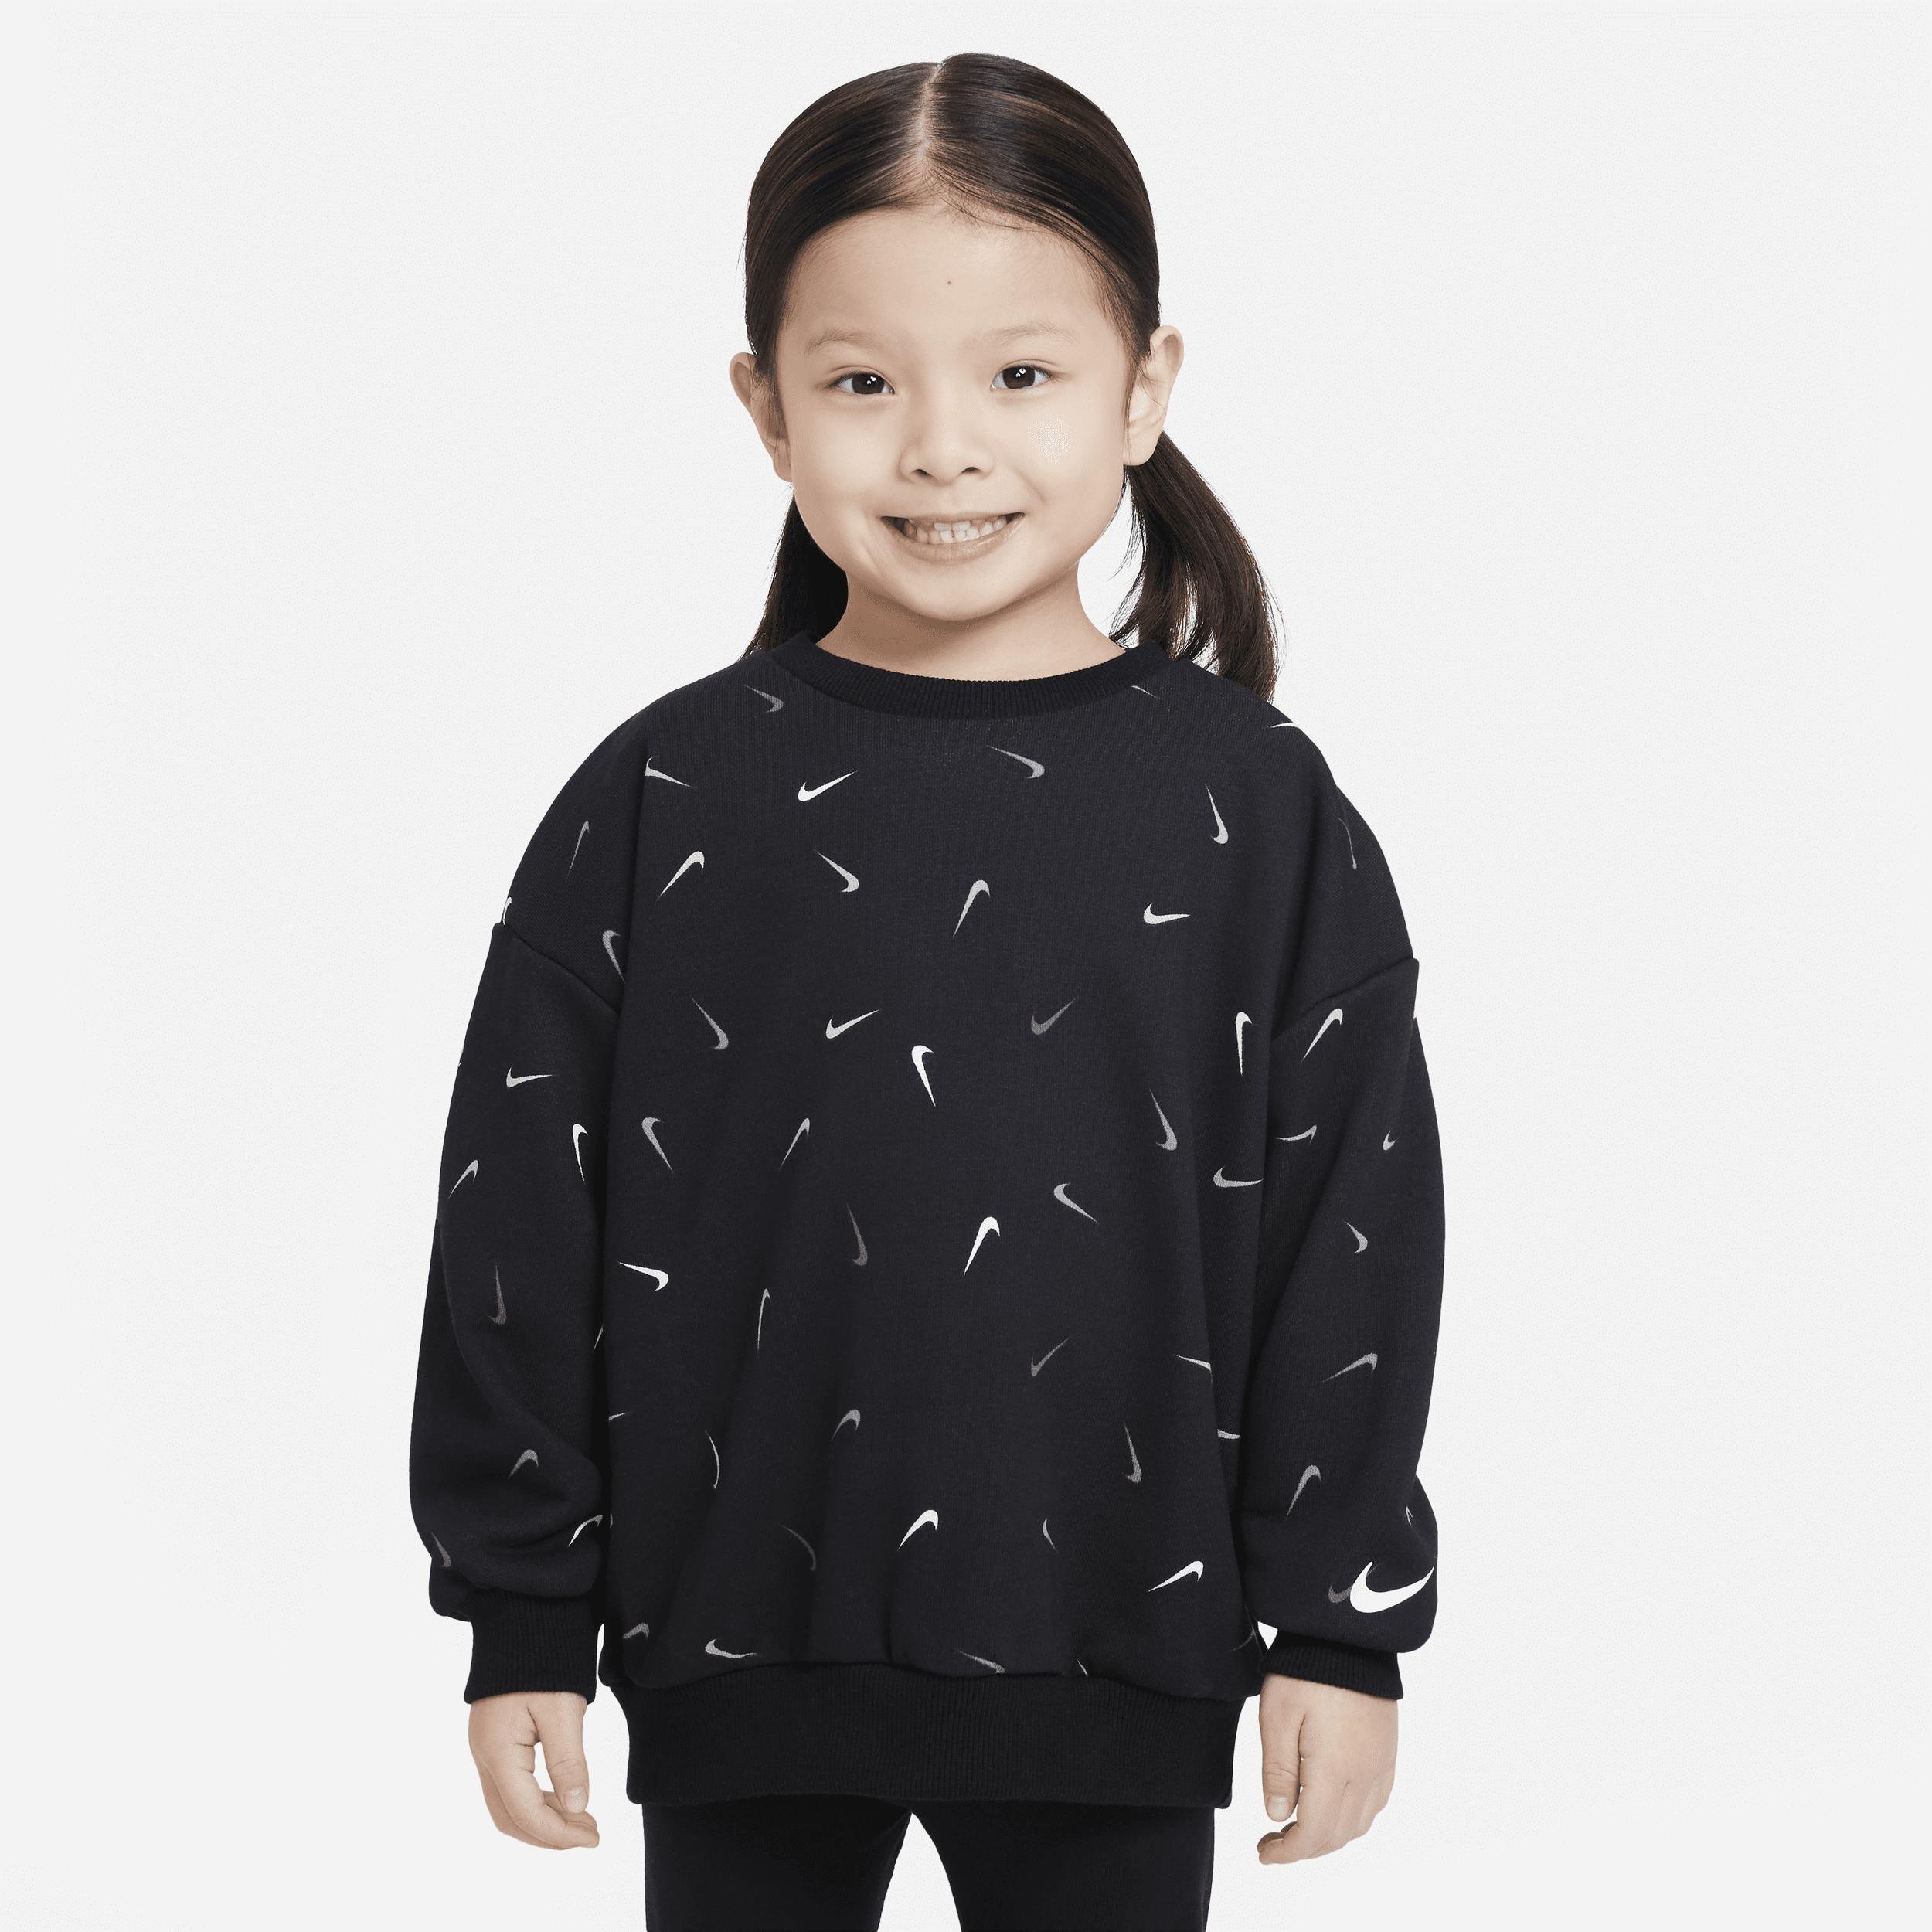 Nike Snack Pack Icon Crew Toddler Top by NIKE